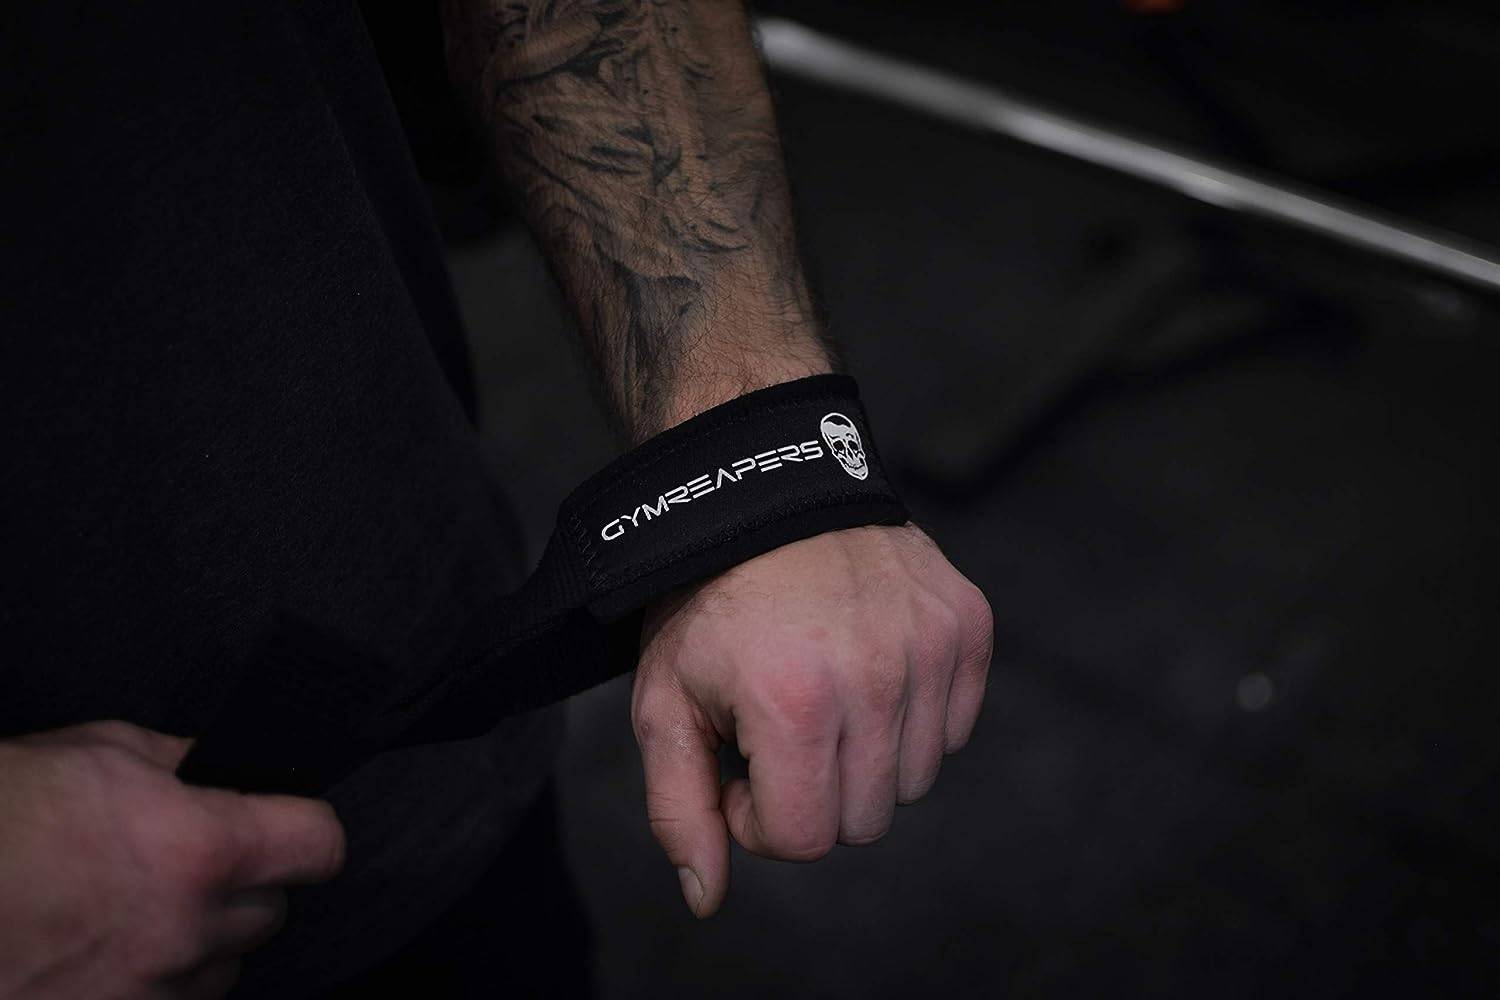 Gymreapers Lifting Wrist Straps